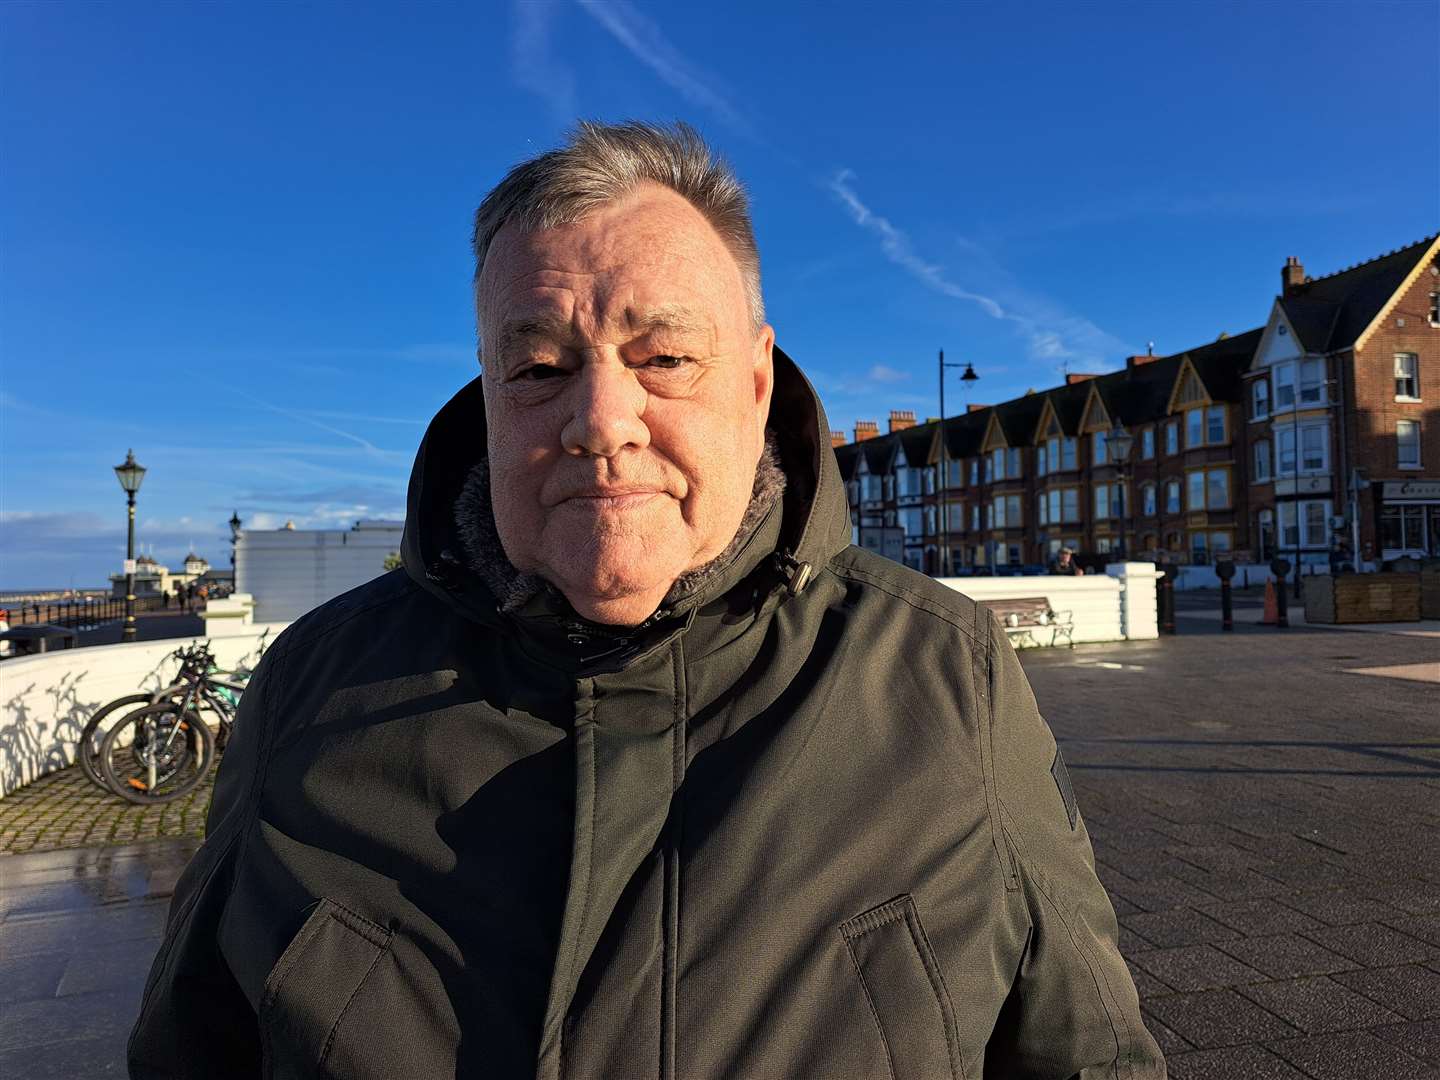 Colin Smith, 69, said that he felt the money spent on the new Herne Bay plaza could have been used better elsewhere in the town